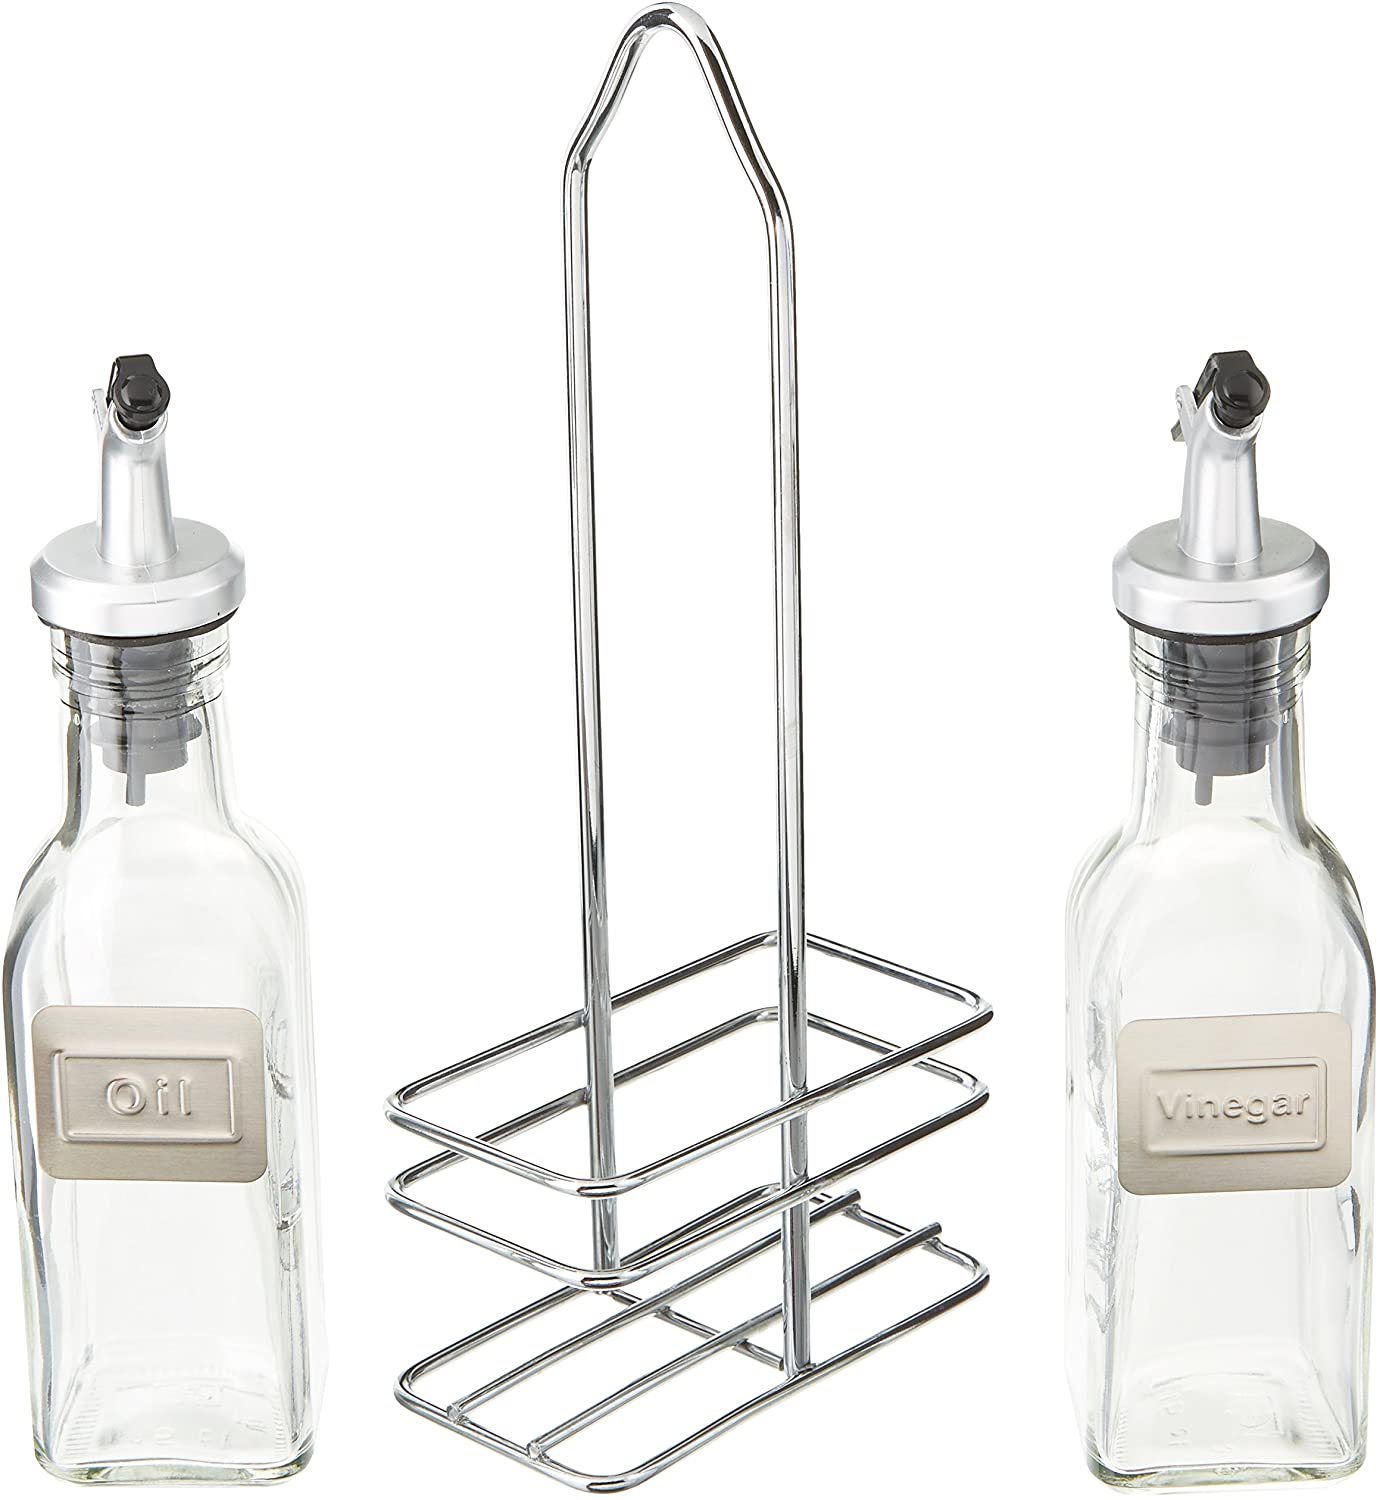 Cuisinox Oil & Vinegar Cruet Set with Caddy with English labels